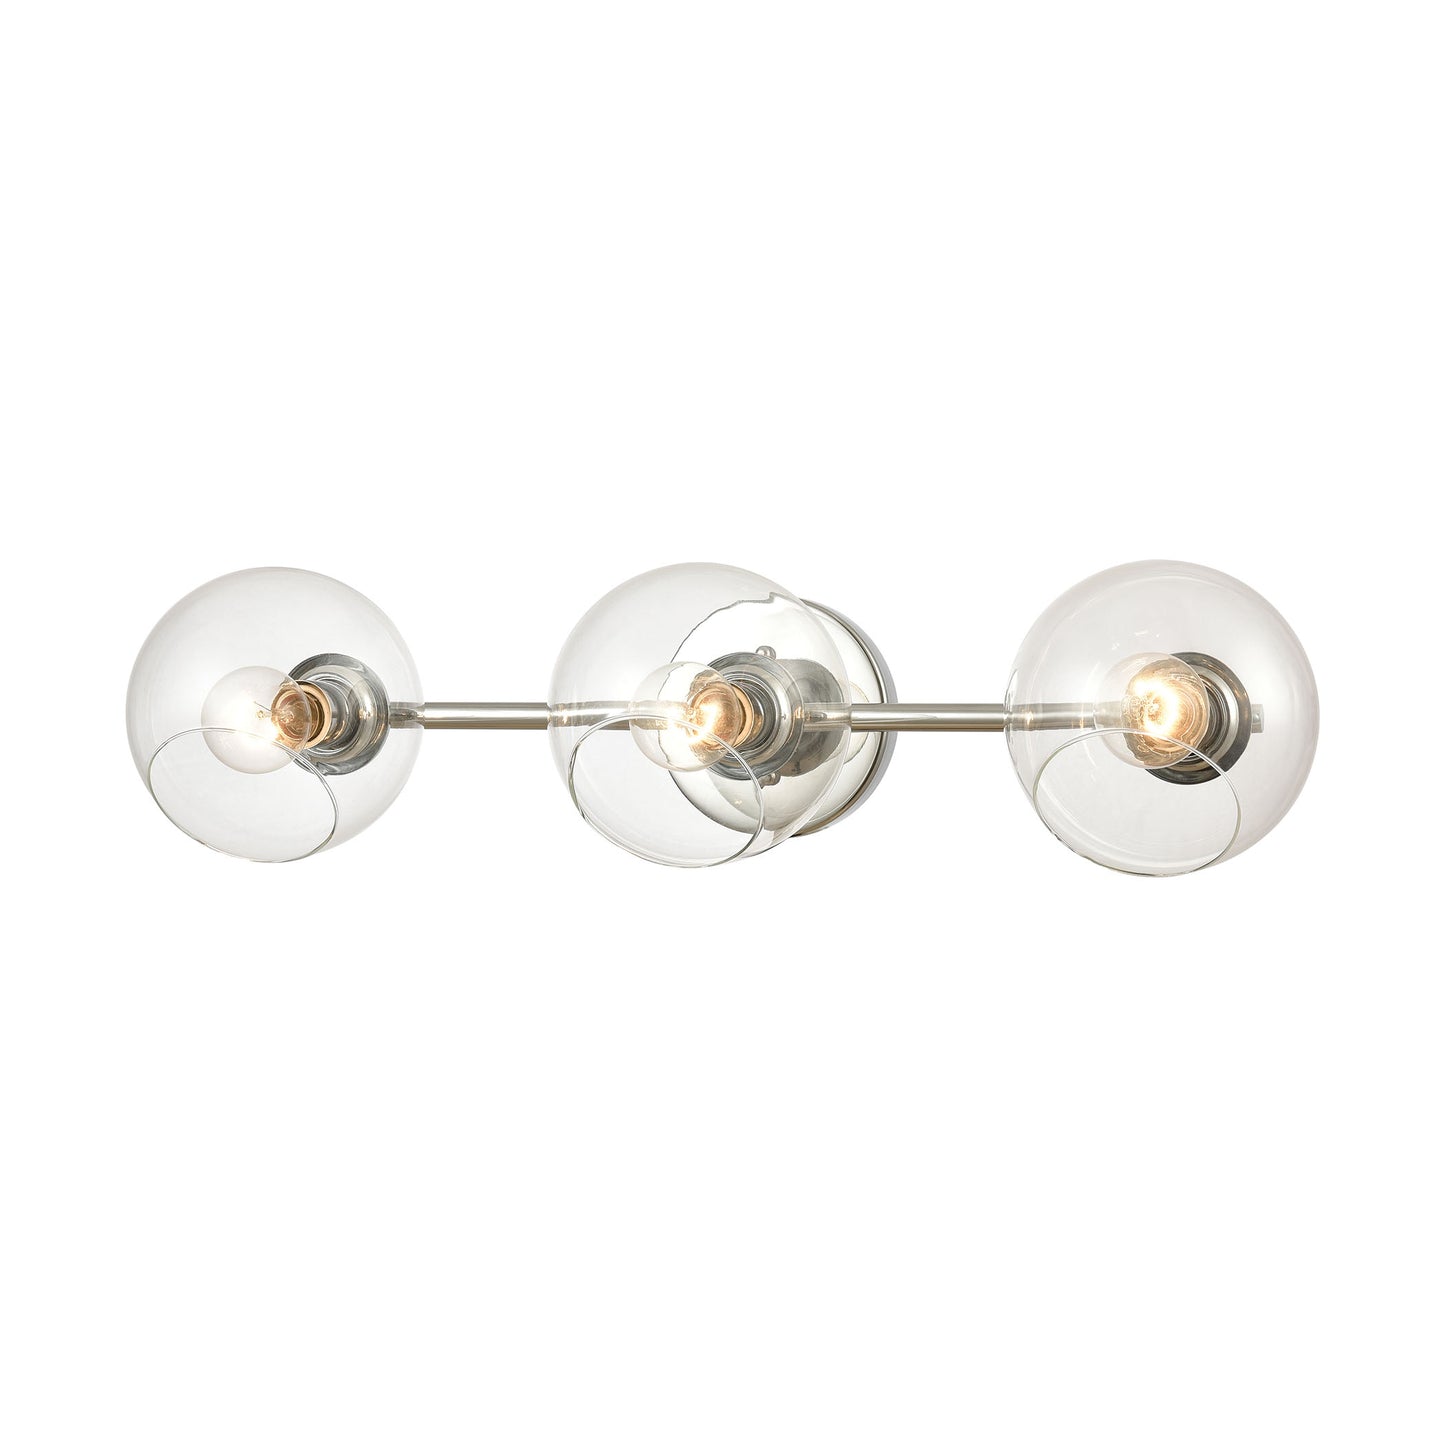 ELK Lighting 18375/3 - Claro 26" Wide 3-Light Vanity Light in Polished Chrome with Clear Glass